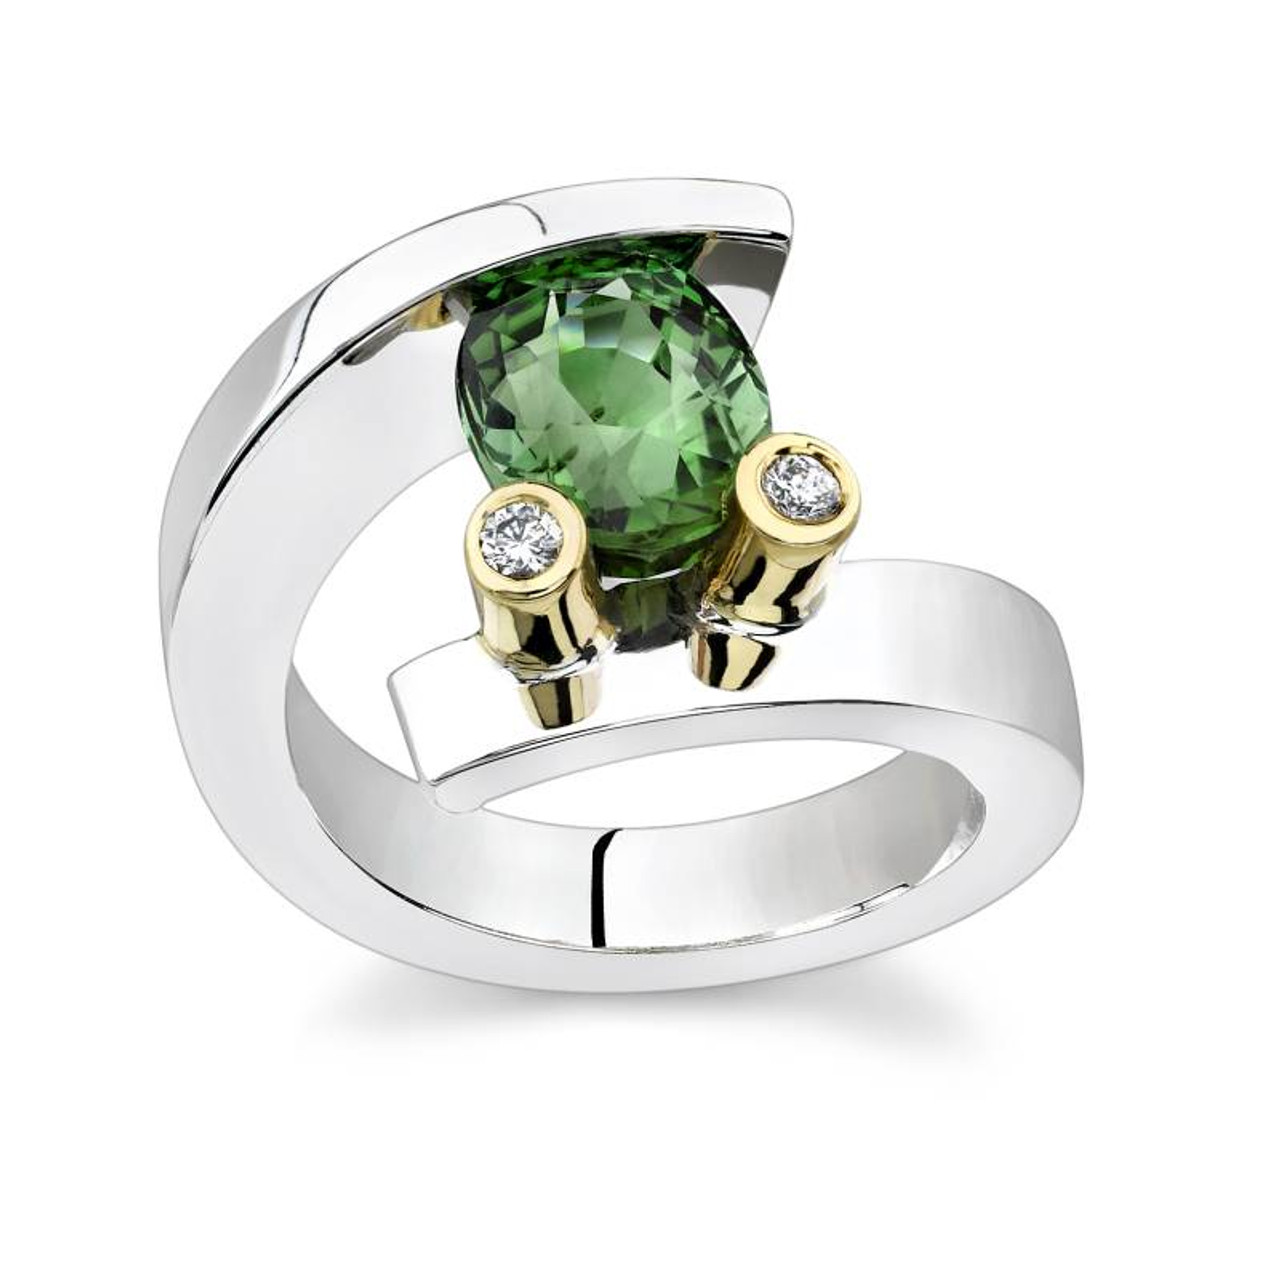 Tension Set Oval Cut Colored Stone Ring - CDS0022 - Gale Diamonds